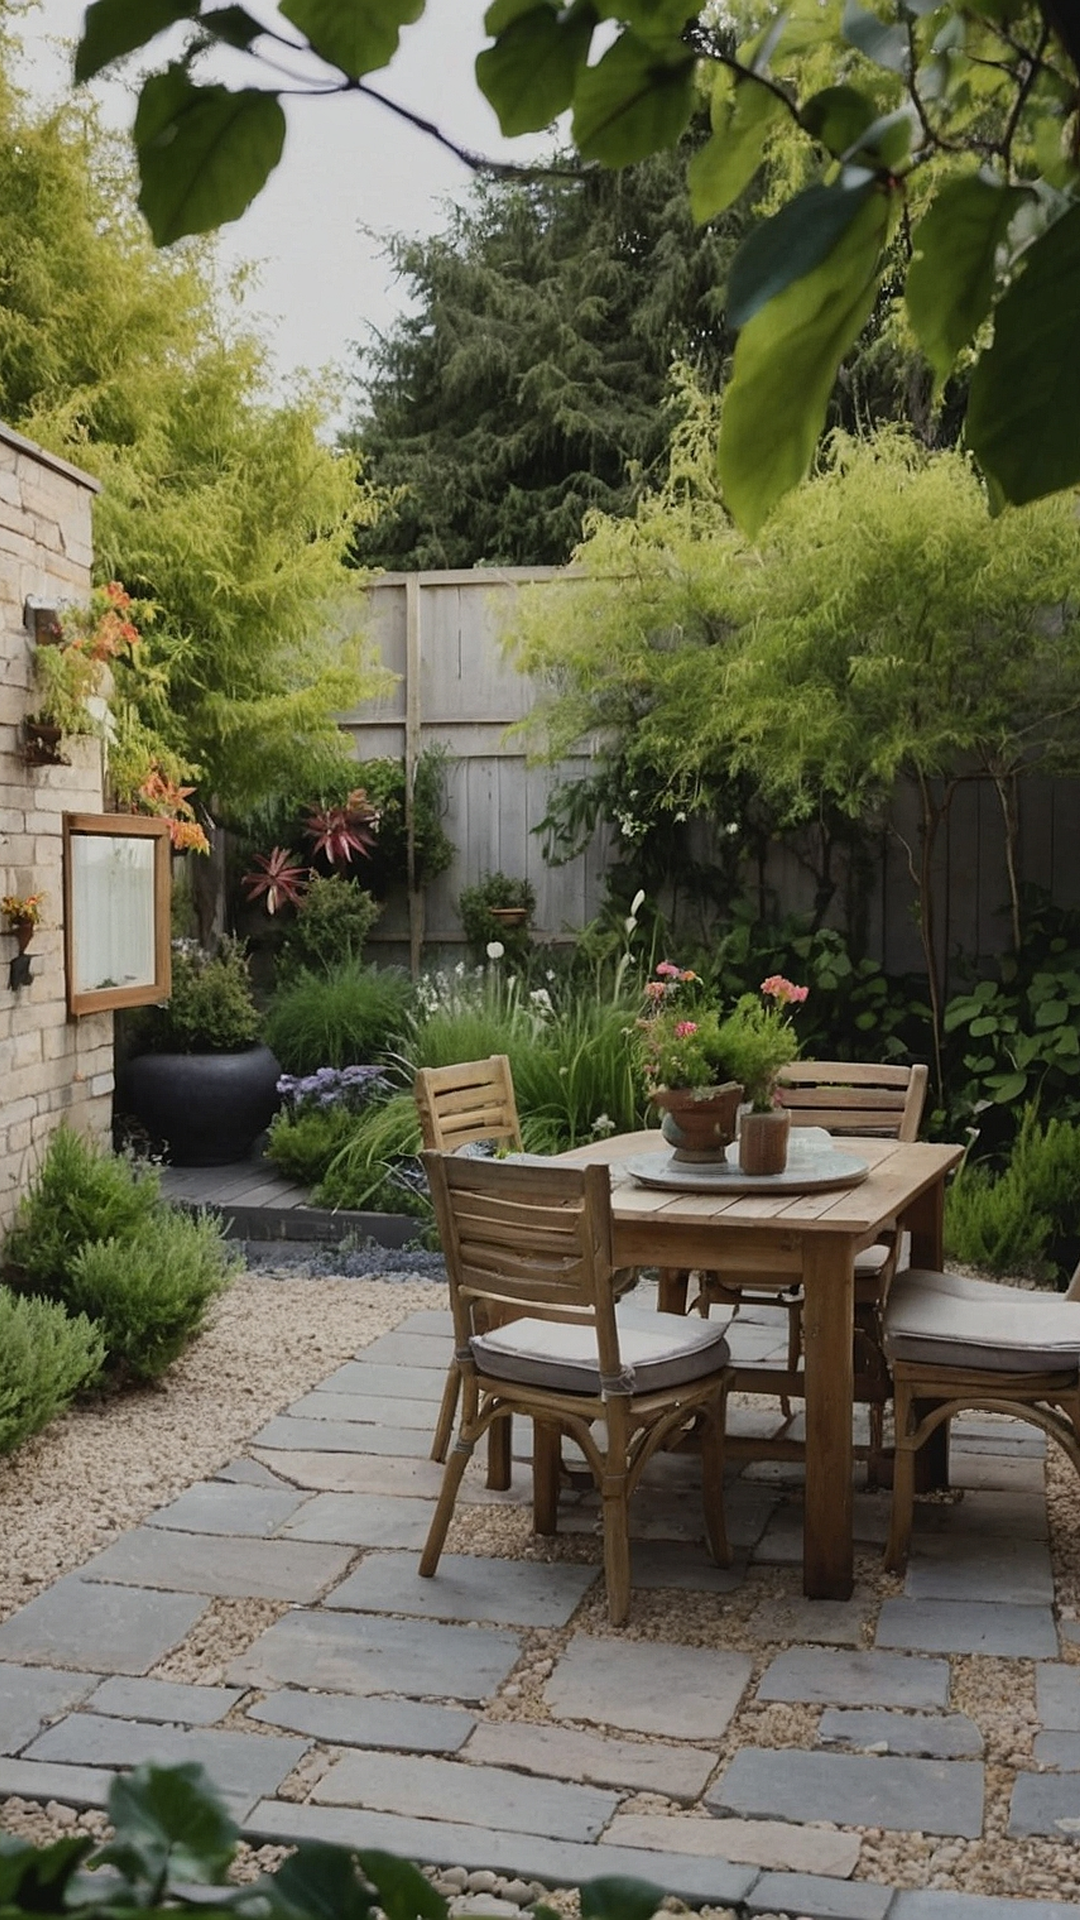 Maximizing Beauty in Small Garden Spaces